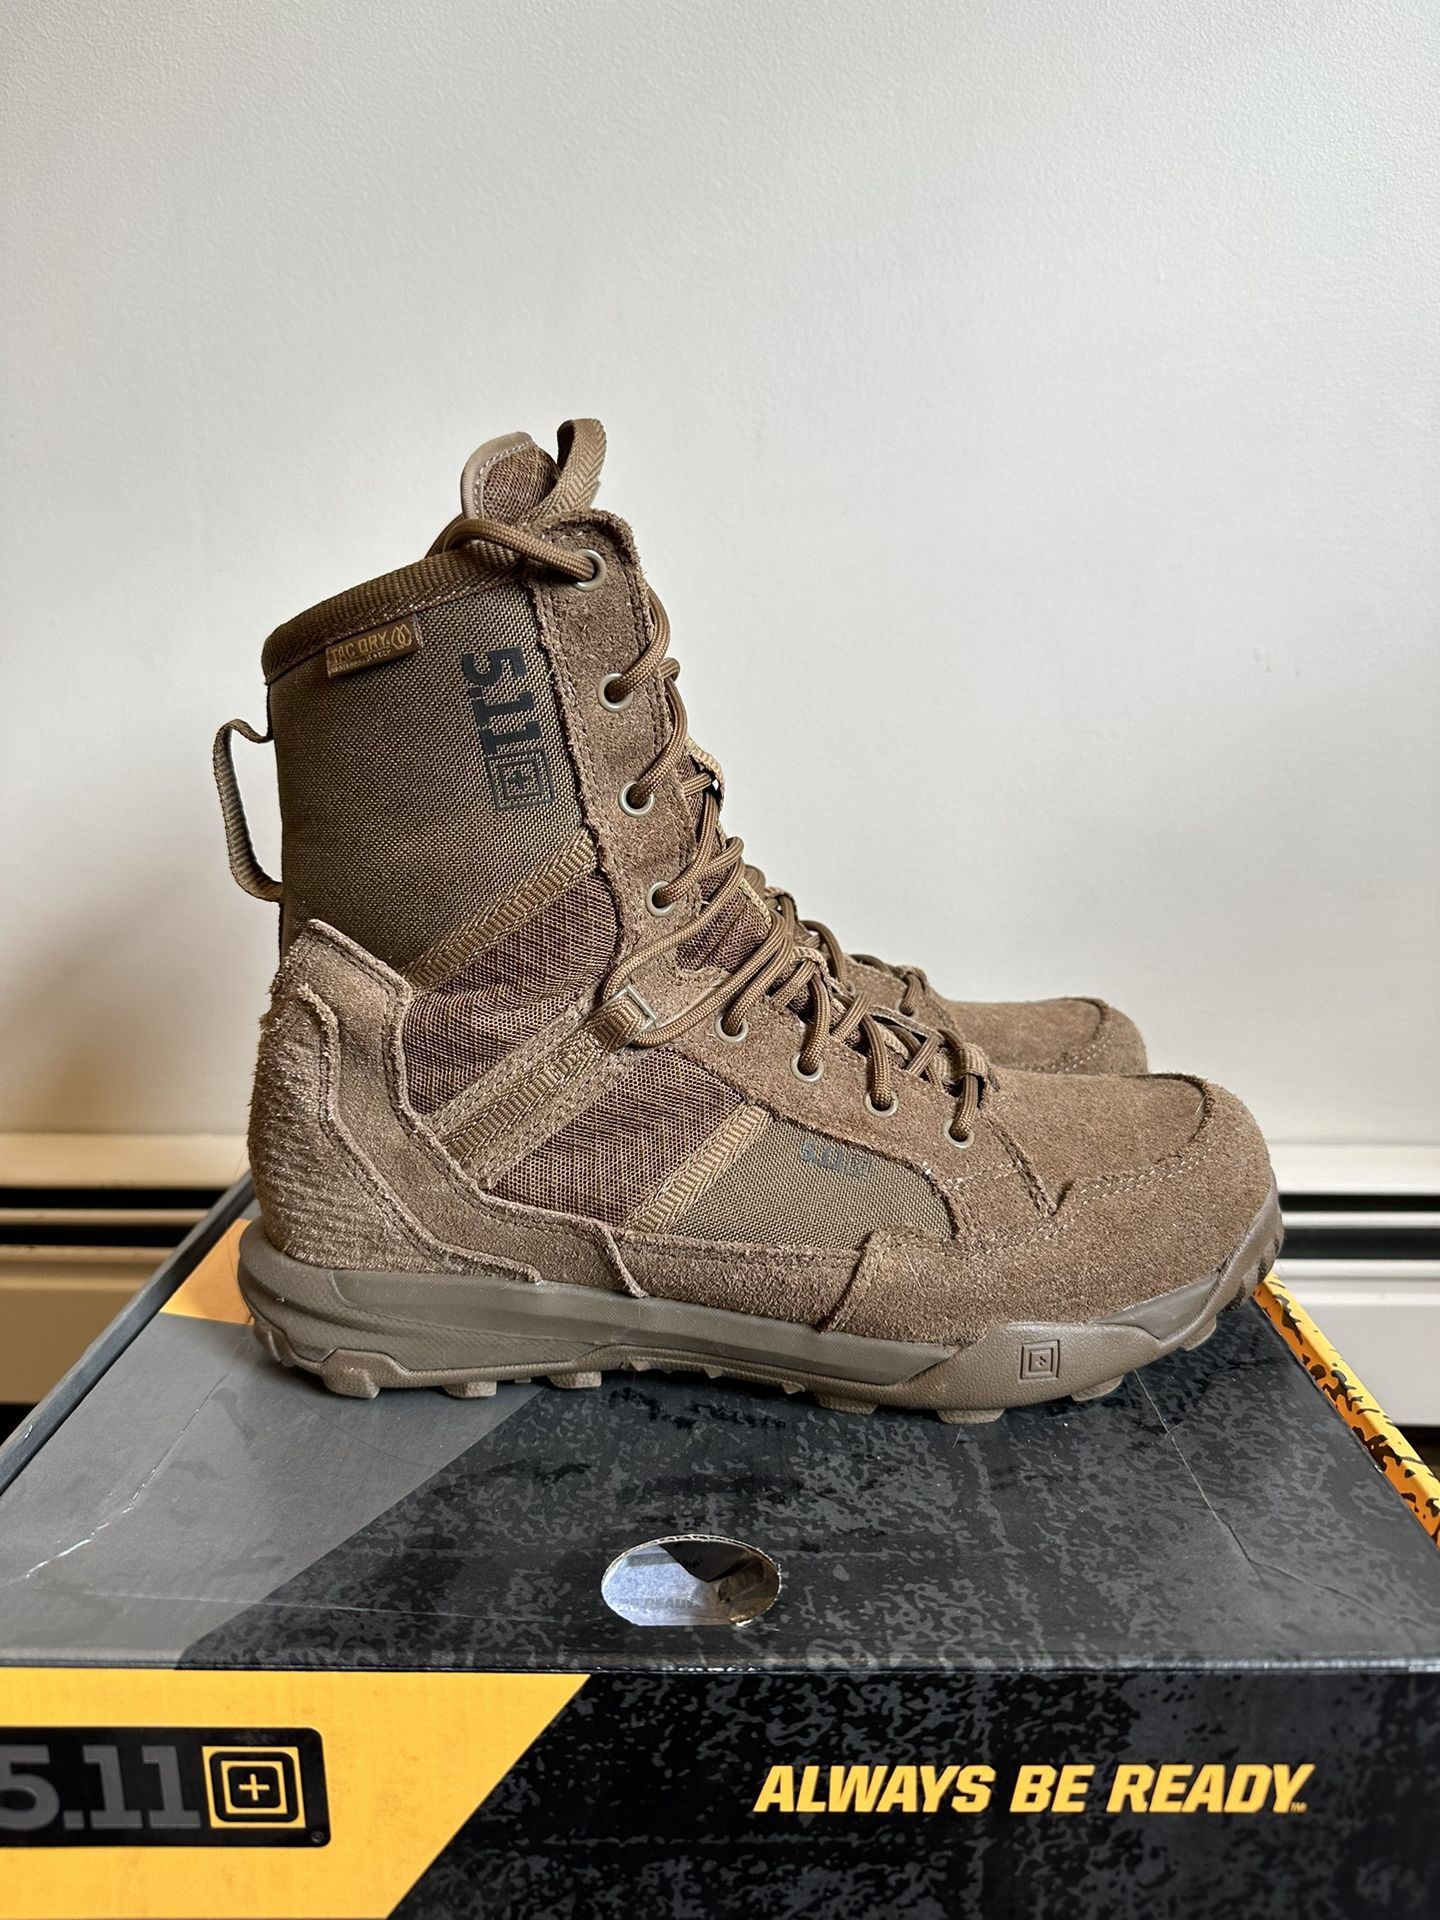 5.11 Tactical A/T Waterproof 8” Boot Size 10.5